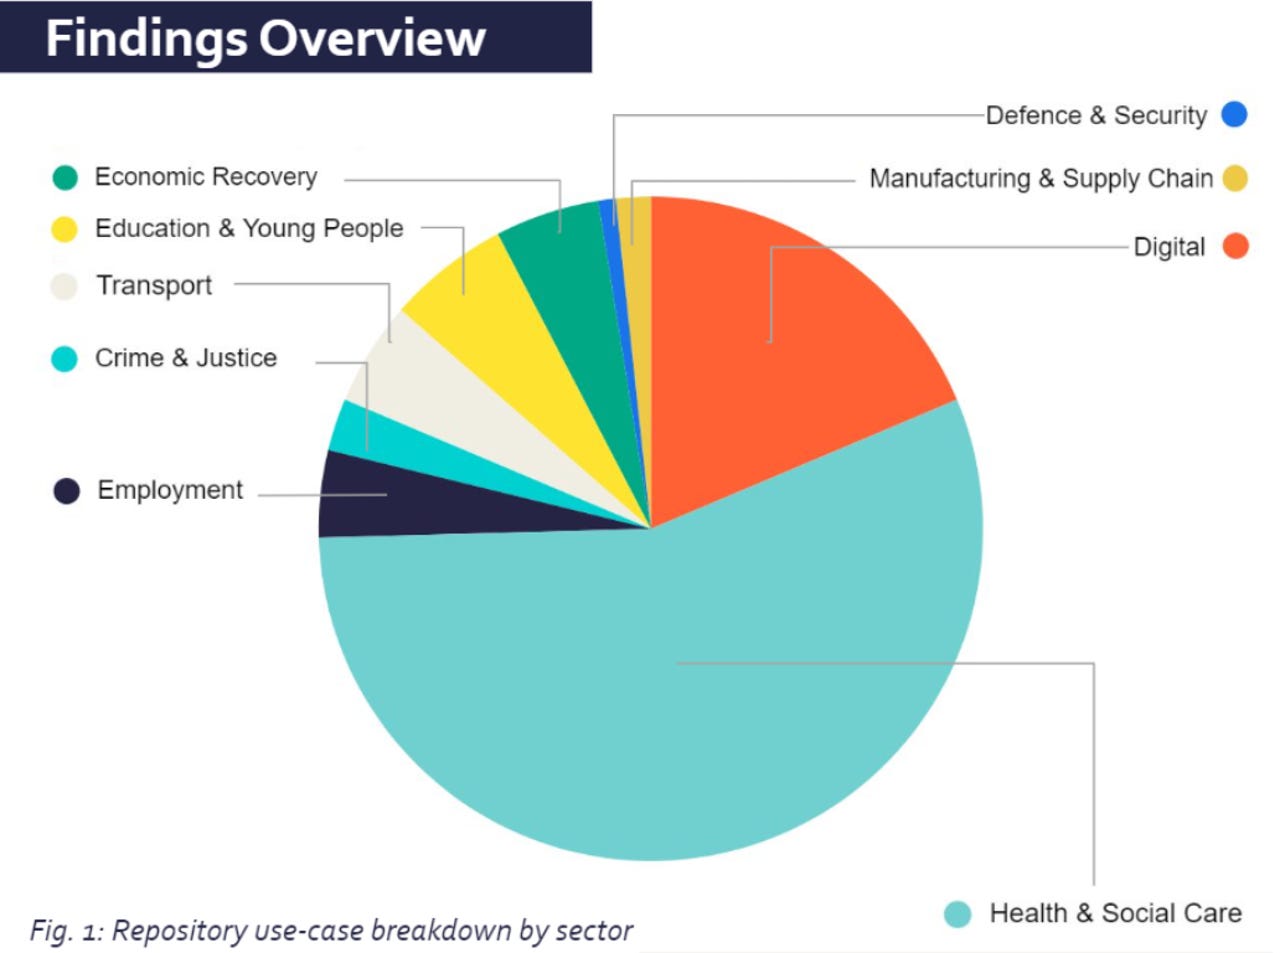 cdei-repository-breakdown-by-sector.png